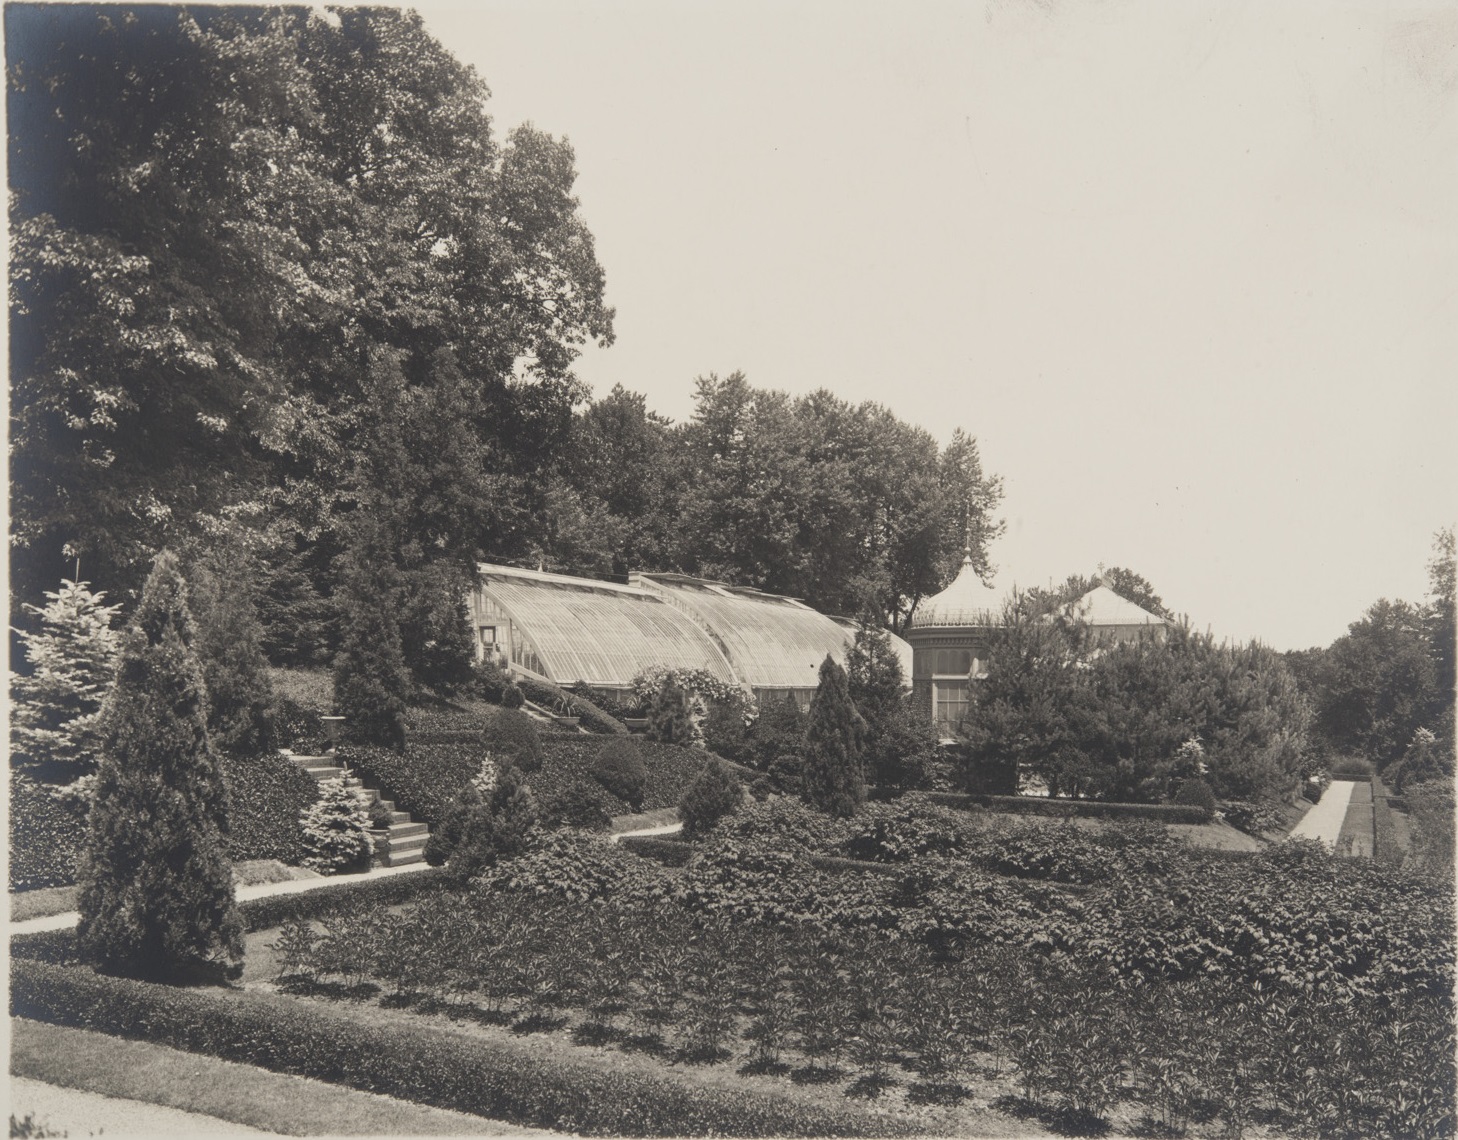 Historical image of Evergreen's gardens and greenhouses.